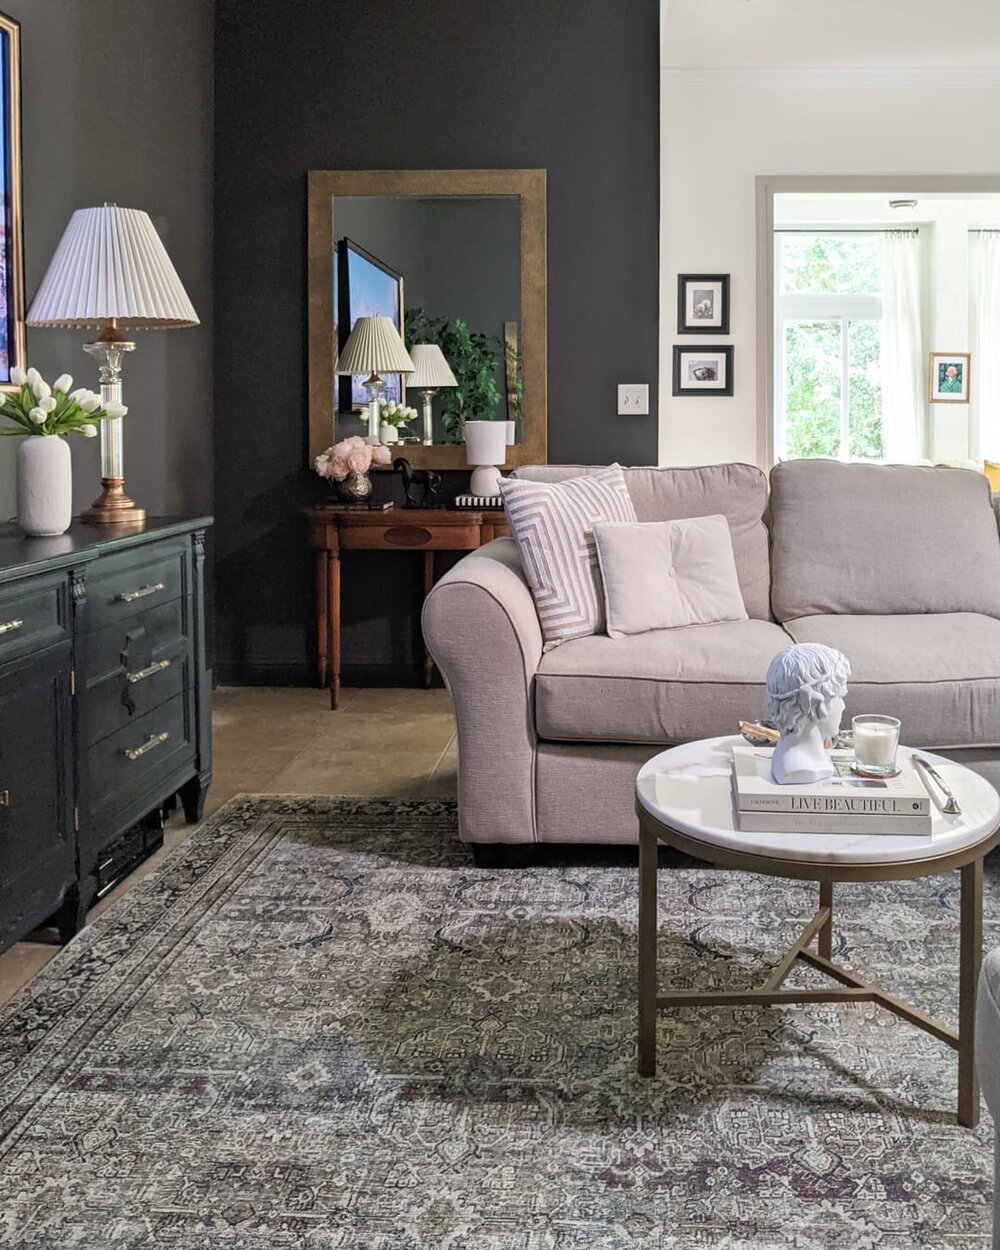 The goal for our living room makeover was to create a space that was not only comfortable to hang out as a family but to also serve as a spot for my husband and I to reconnect after the little ones have gone to bed. 

By using paint, we created a spa